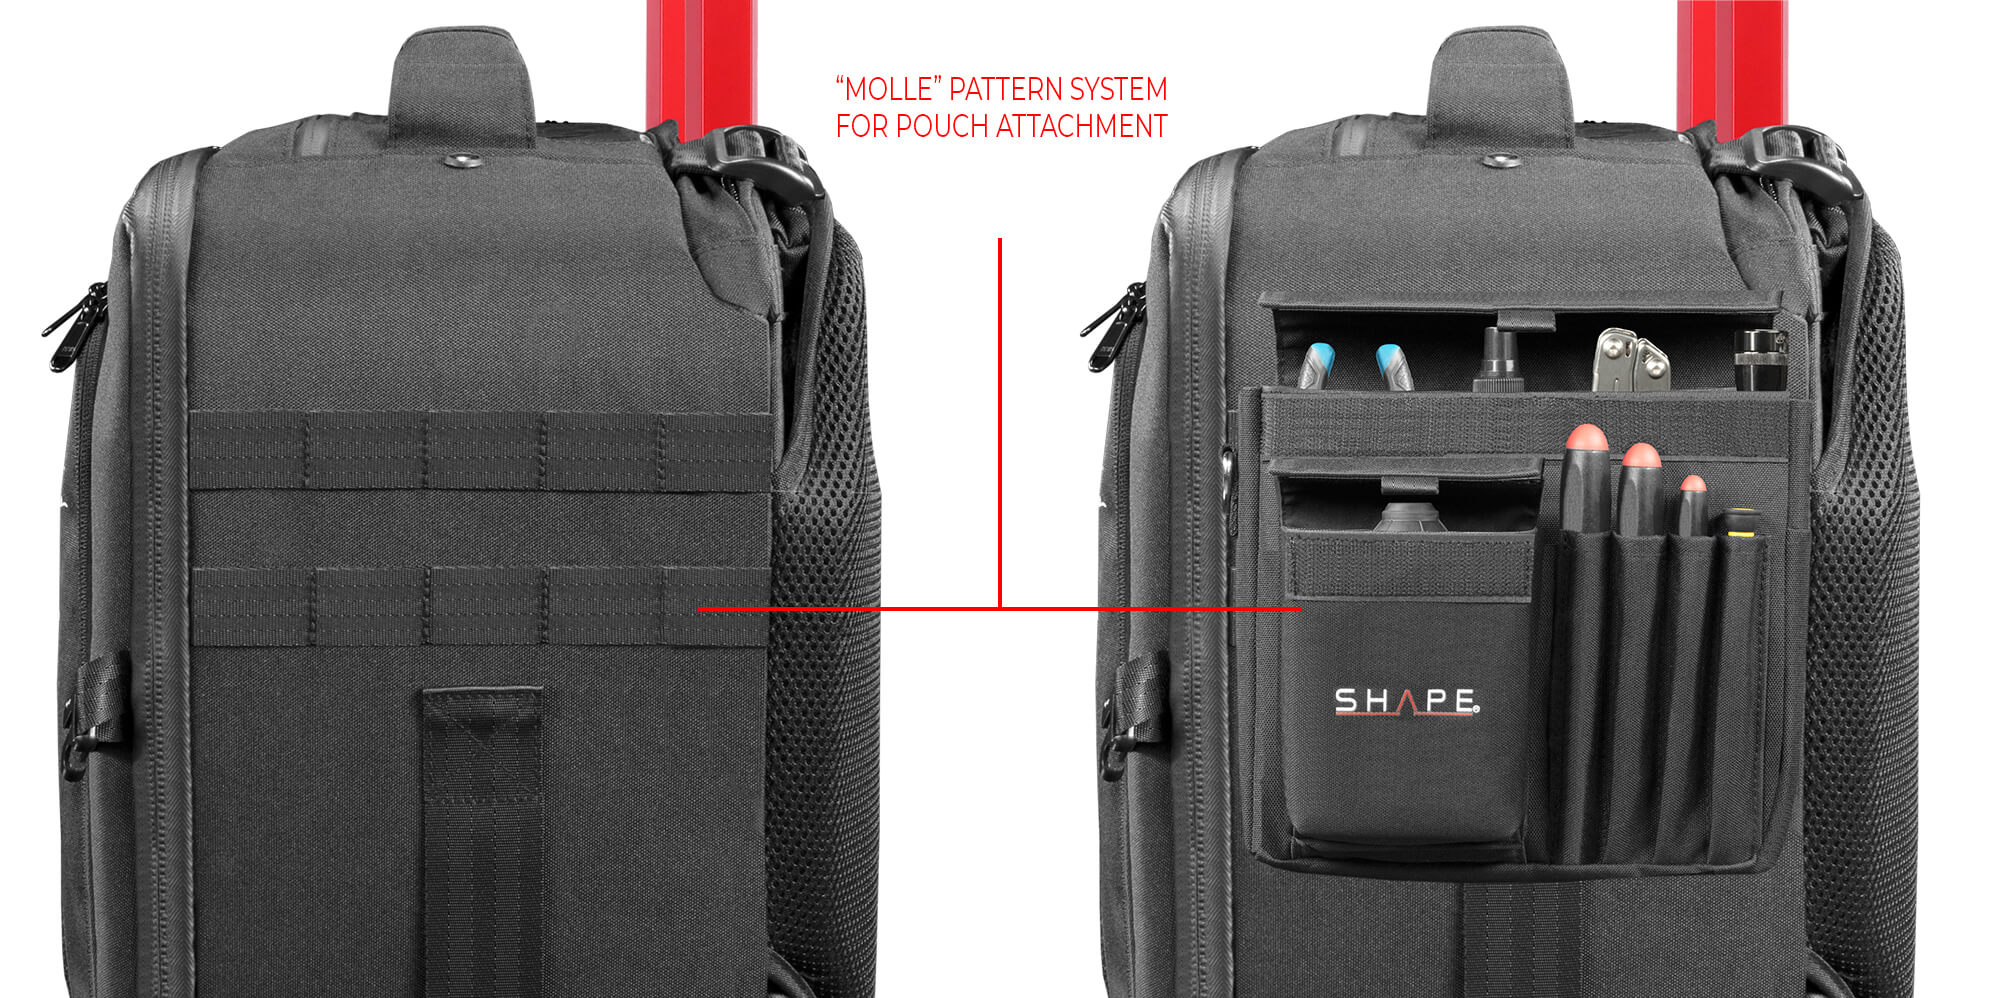 SHAPE Pro Video Camera Backpack product image highlighting the molle pattern system for pouch attachment.